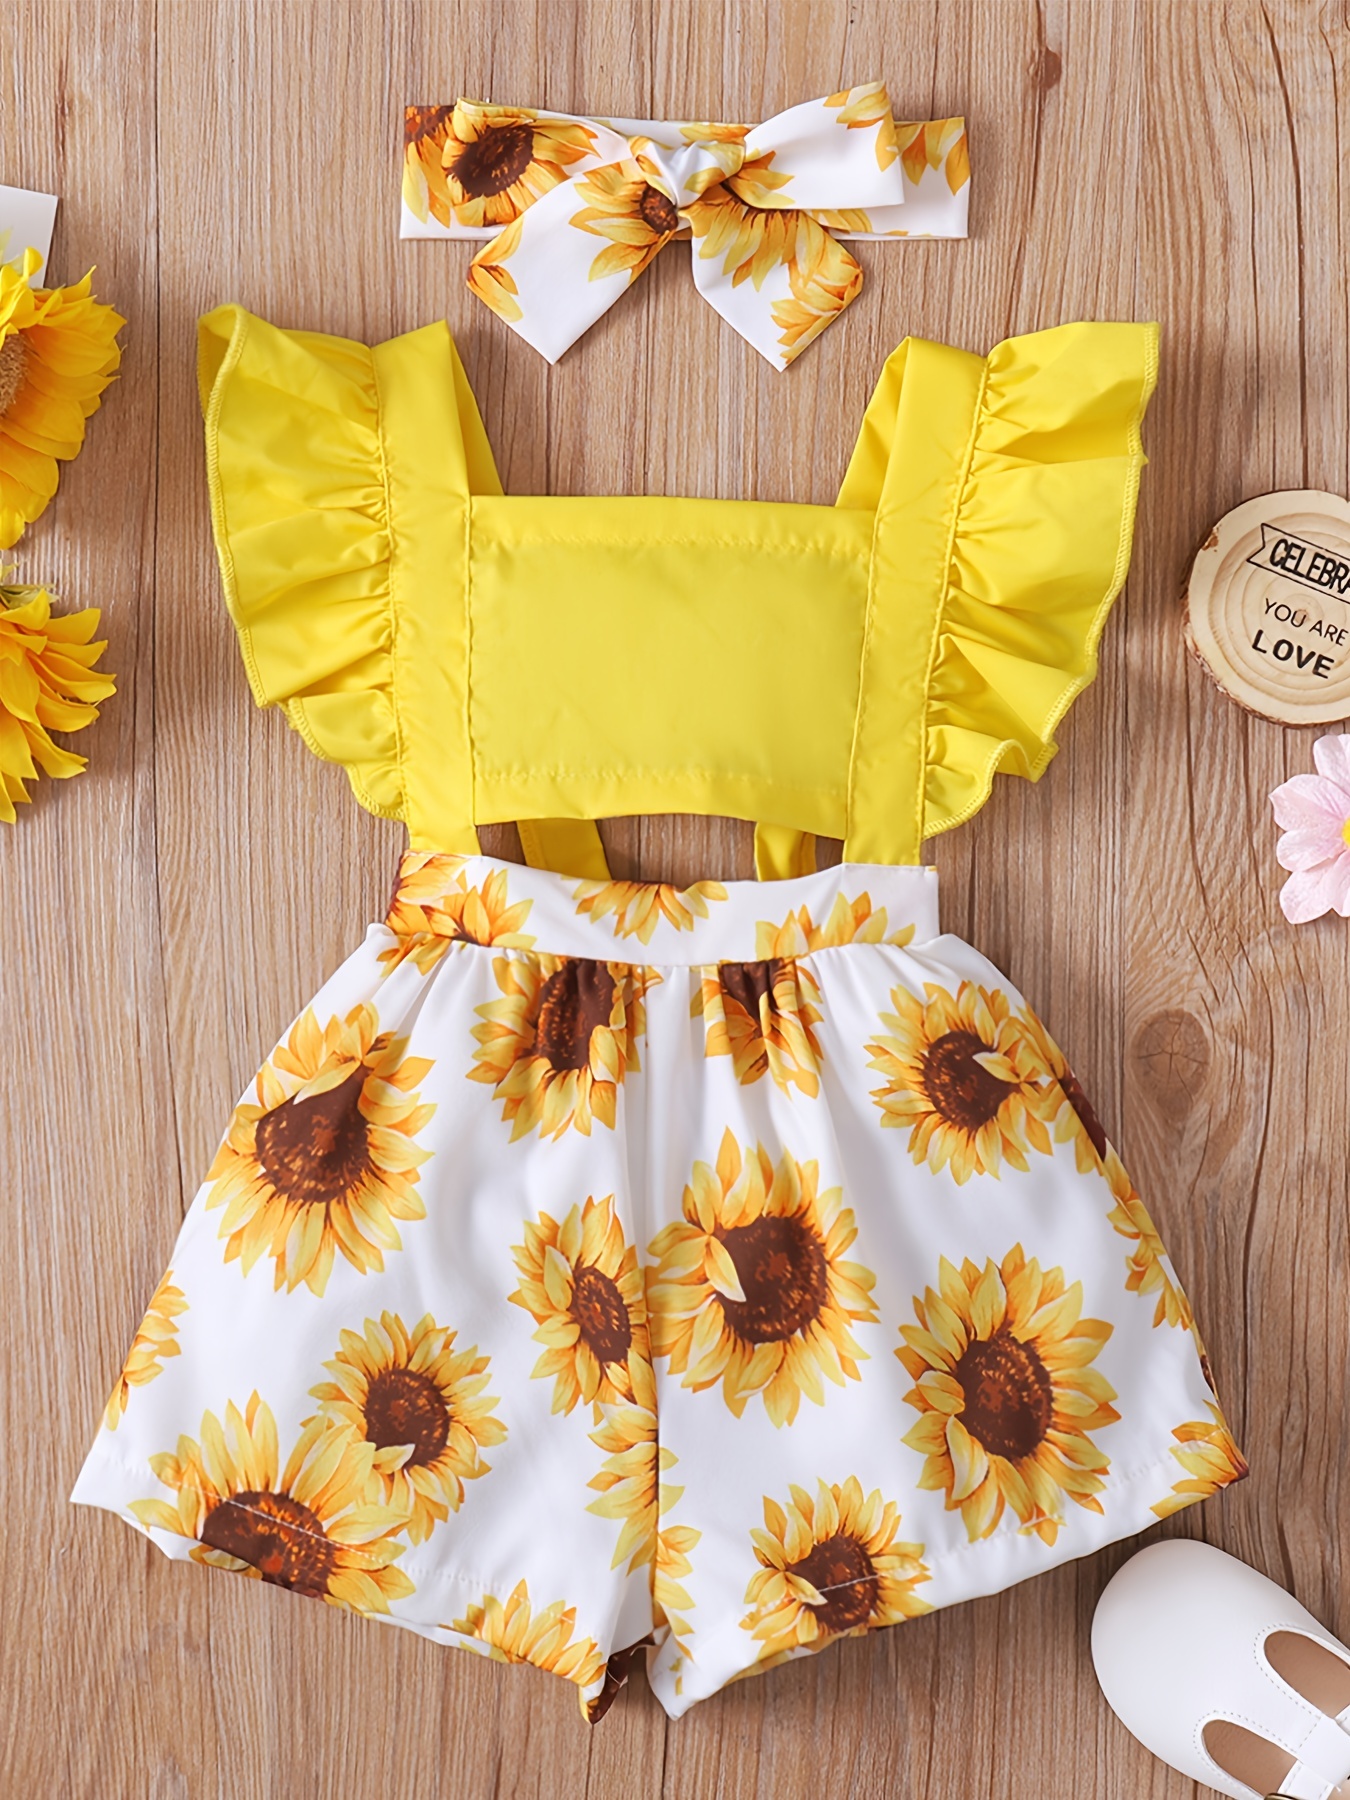 Baby Girls Sleeveless Romper With Sunflowers Print Baby Clothes Summer